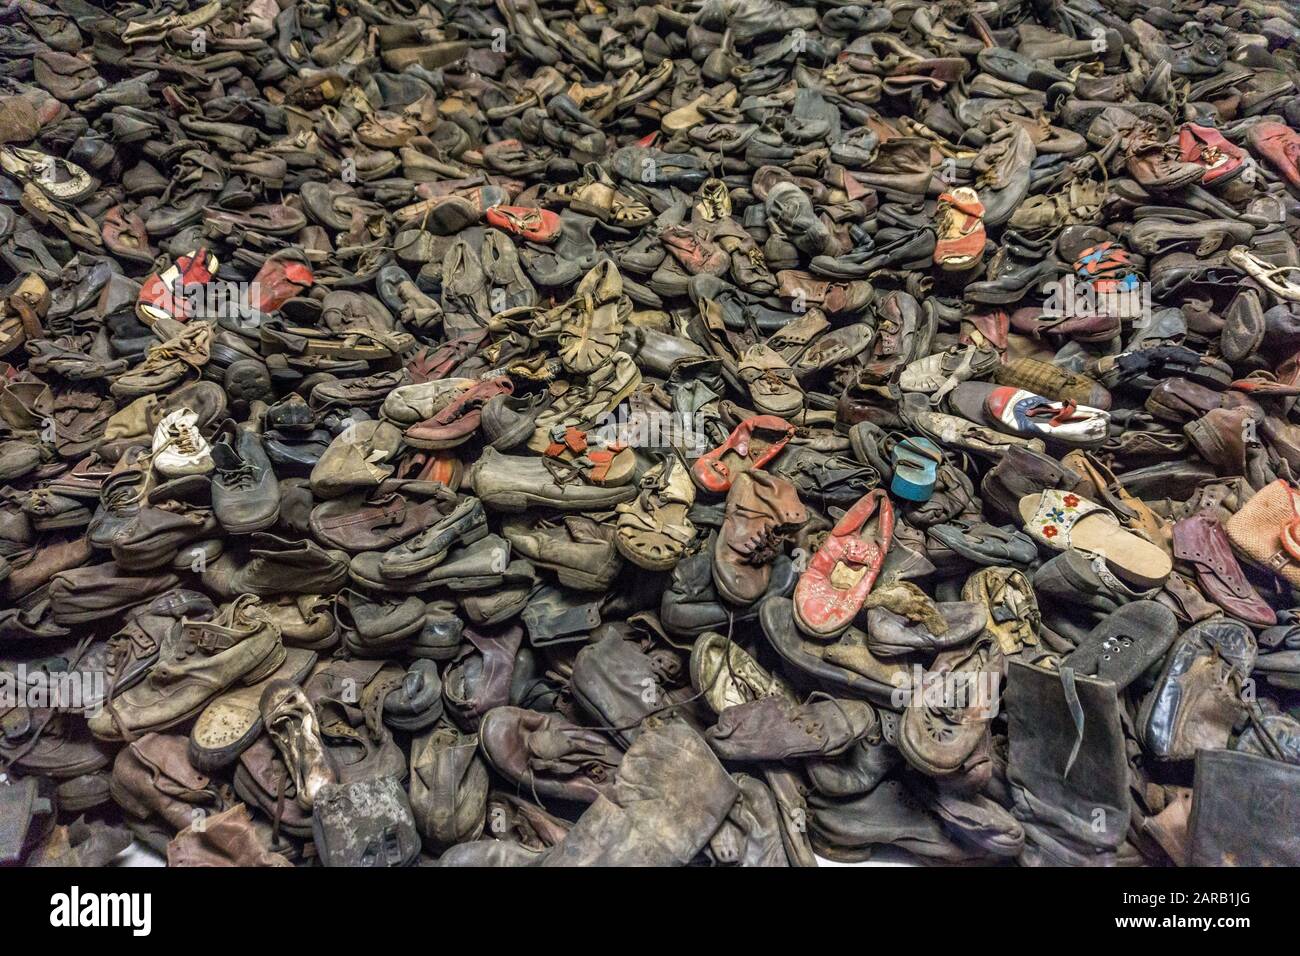 Shoes from the prisoners of Auschwitz concentration camp, Oświęcim, Poland Stock Photo